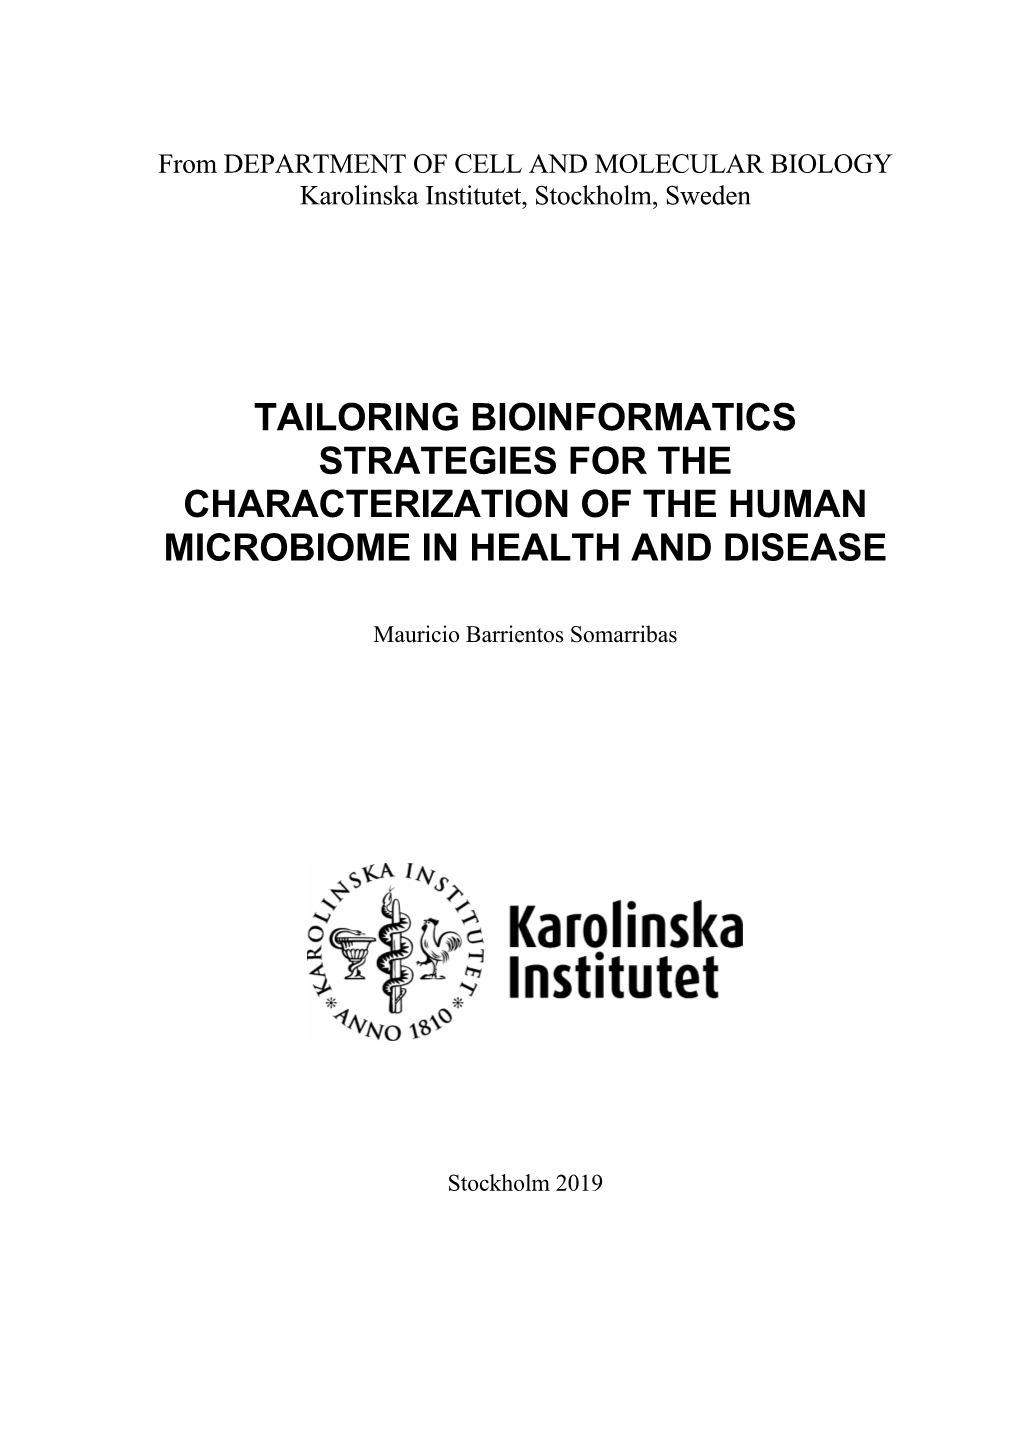 Tailoring Bioinformatics Strategies for the Characterization of the Human Microbiome in Health and Disease